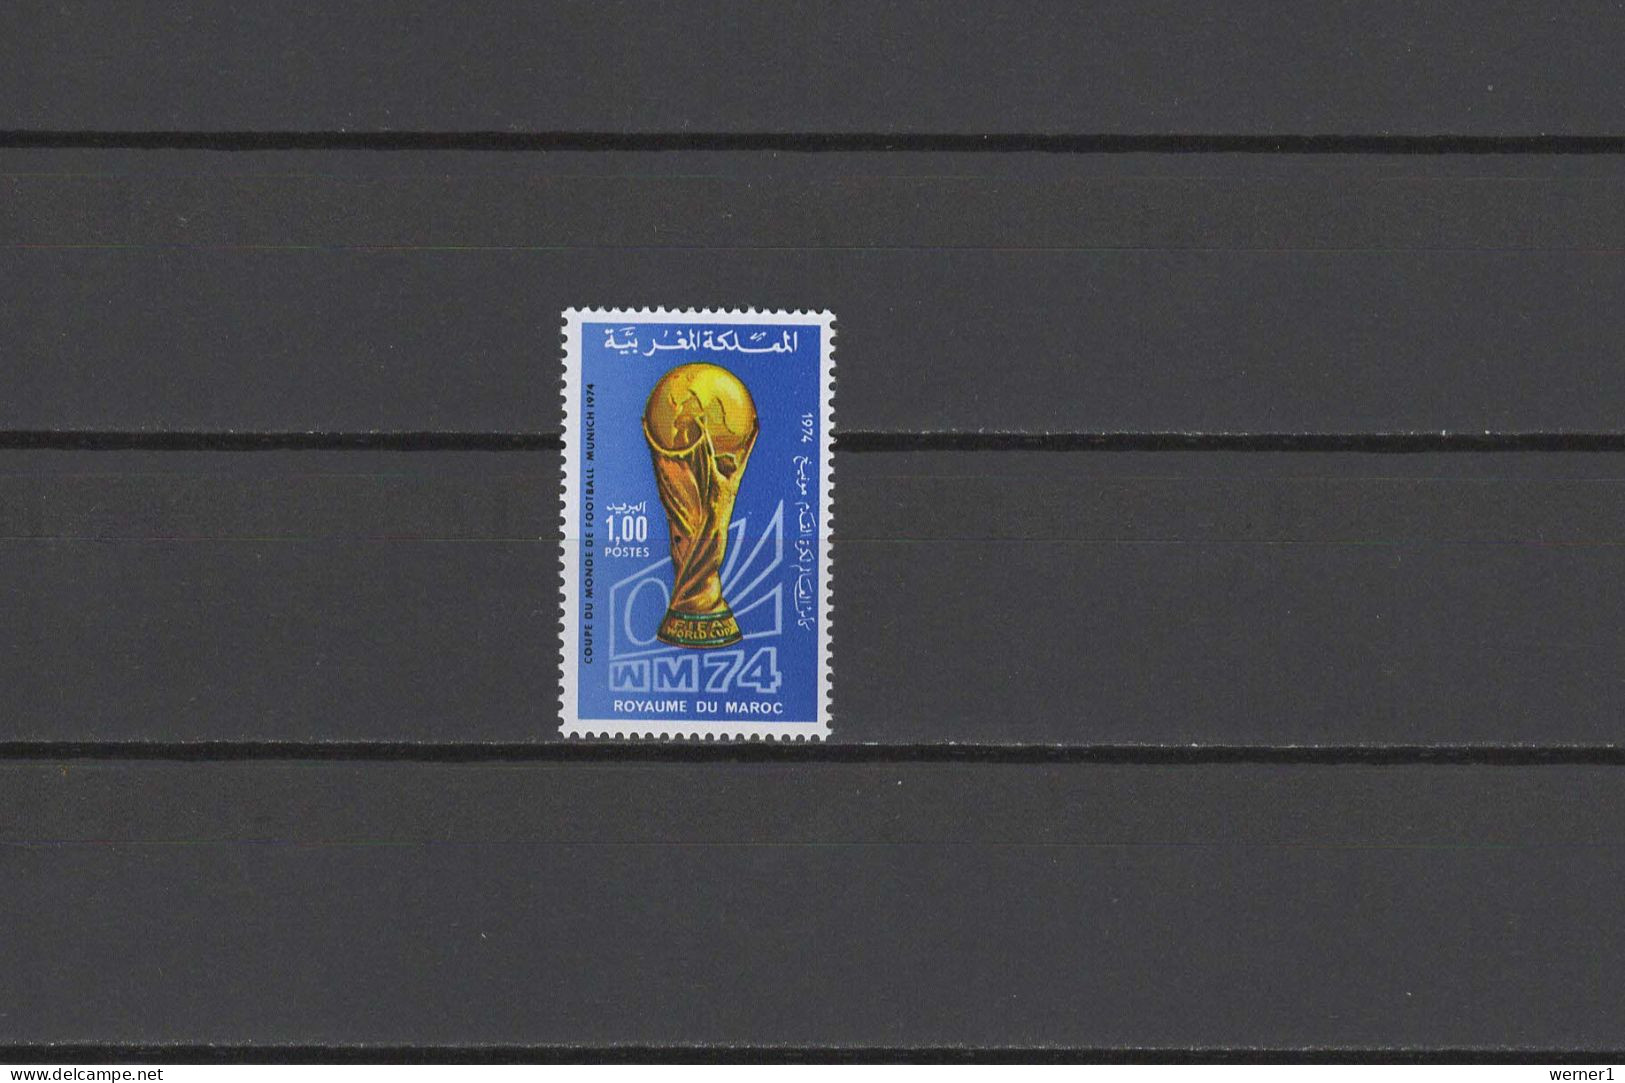 Morocco 1974 Football Soccer World Cup Stamp MNH - 1974 – West Germany